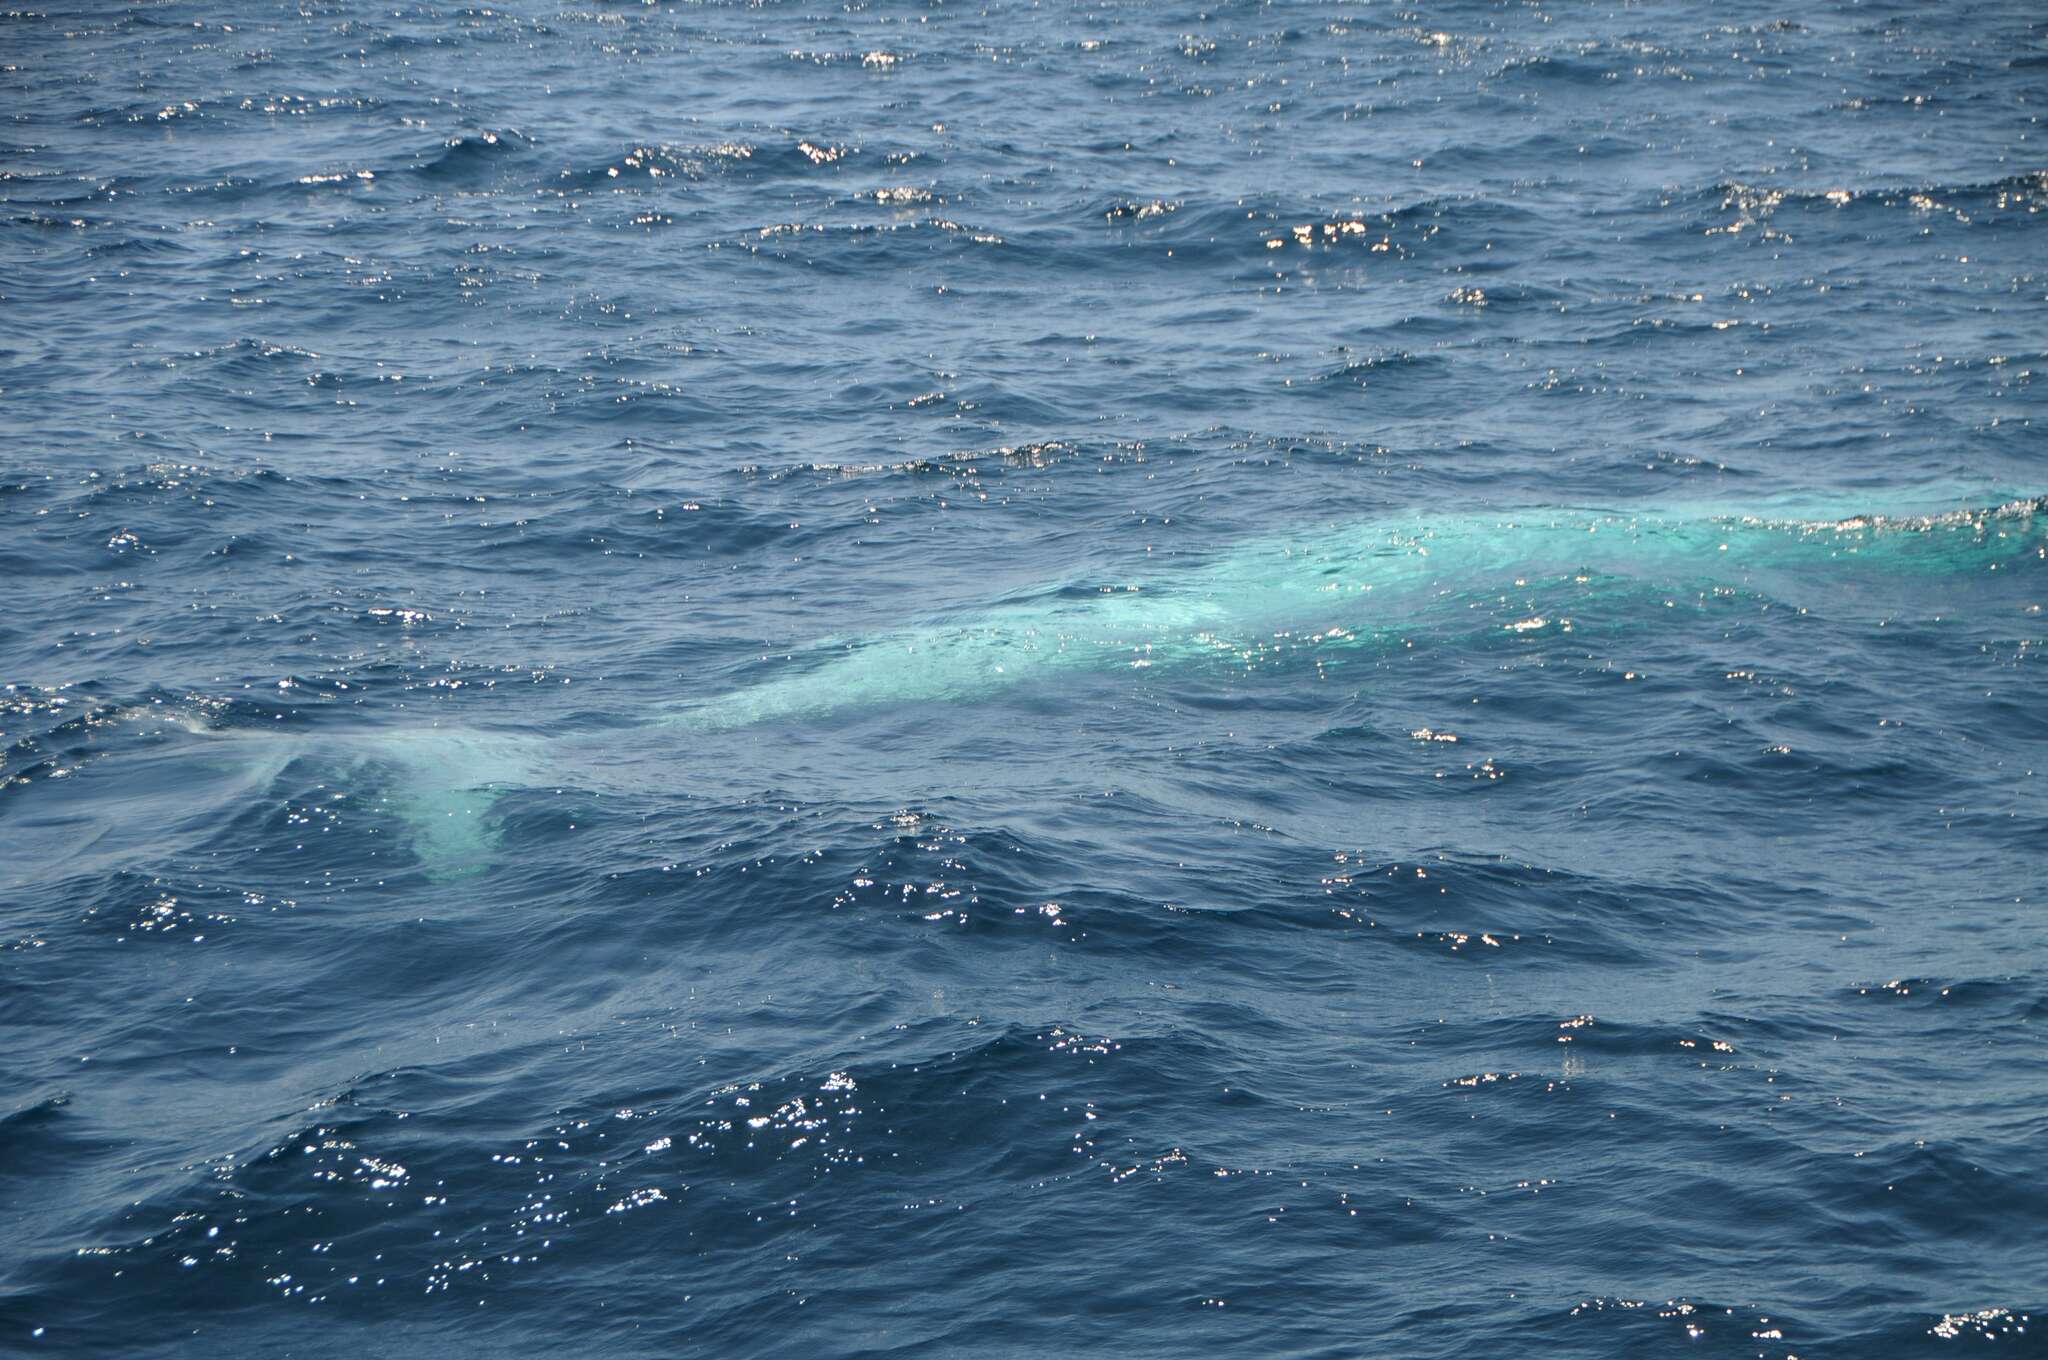 Image of Bryde's Whale